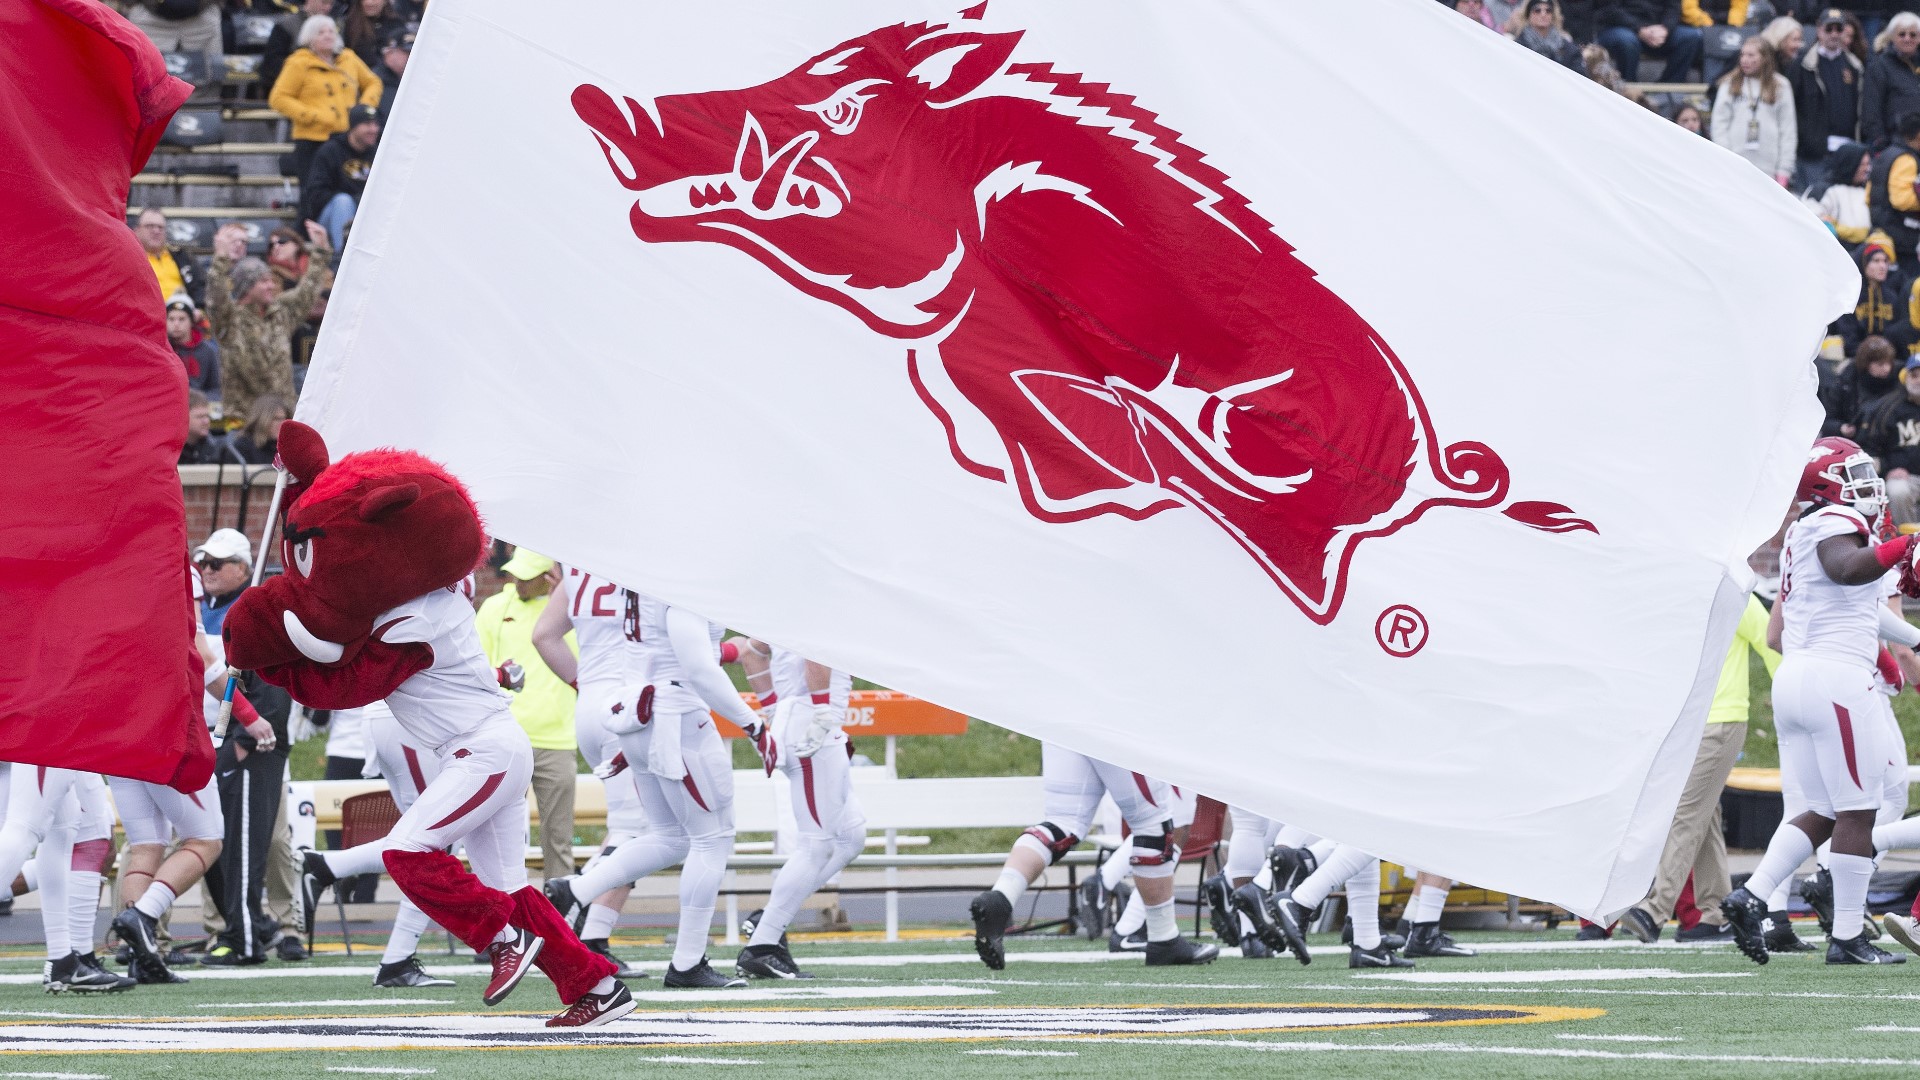 Arkansas is set to face Western Carolina at 12 p.m. Saturday in Little Rock.